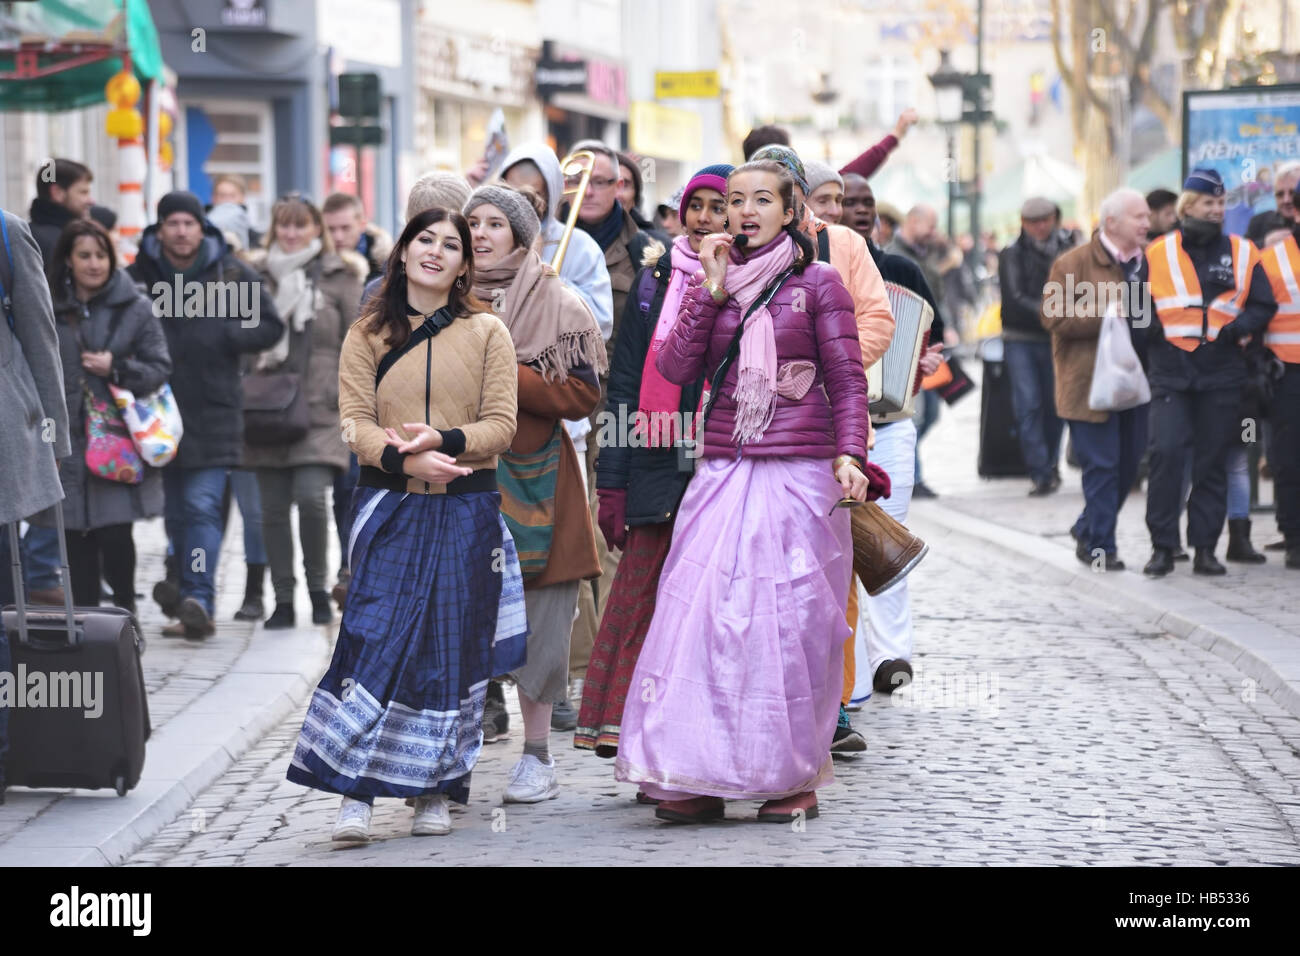 Activists of International Society for Krishna Consciousness sing during procession on the streets in historical center of Brussels, Belgium, on Satur Stock Photo